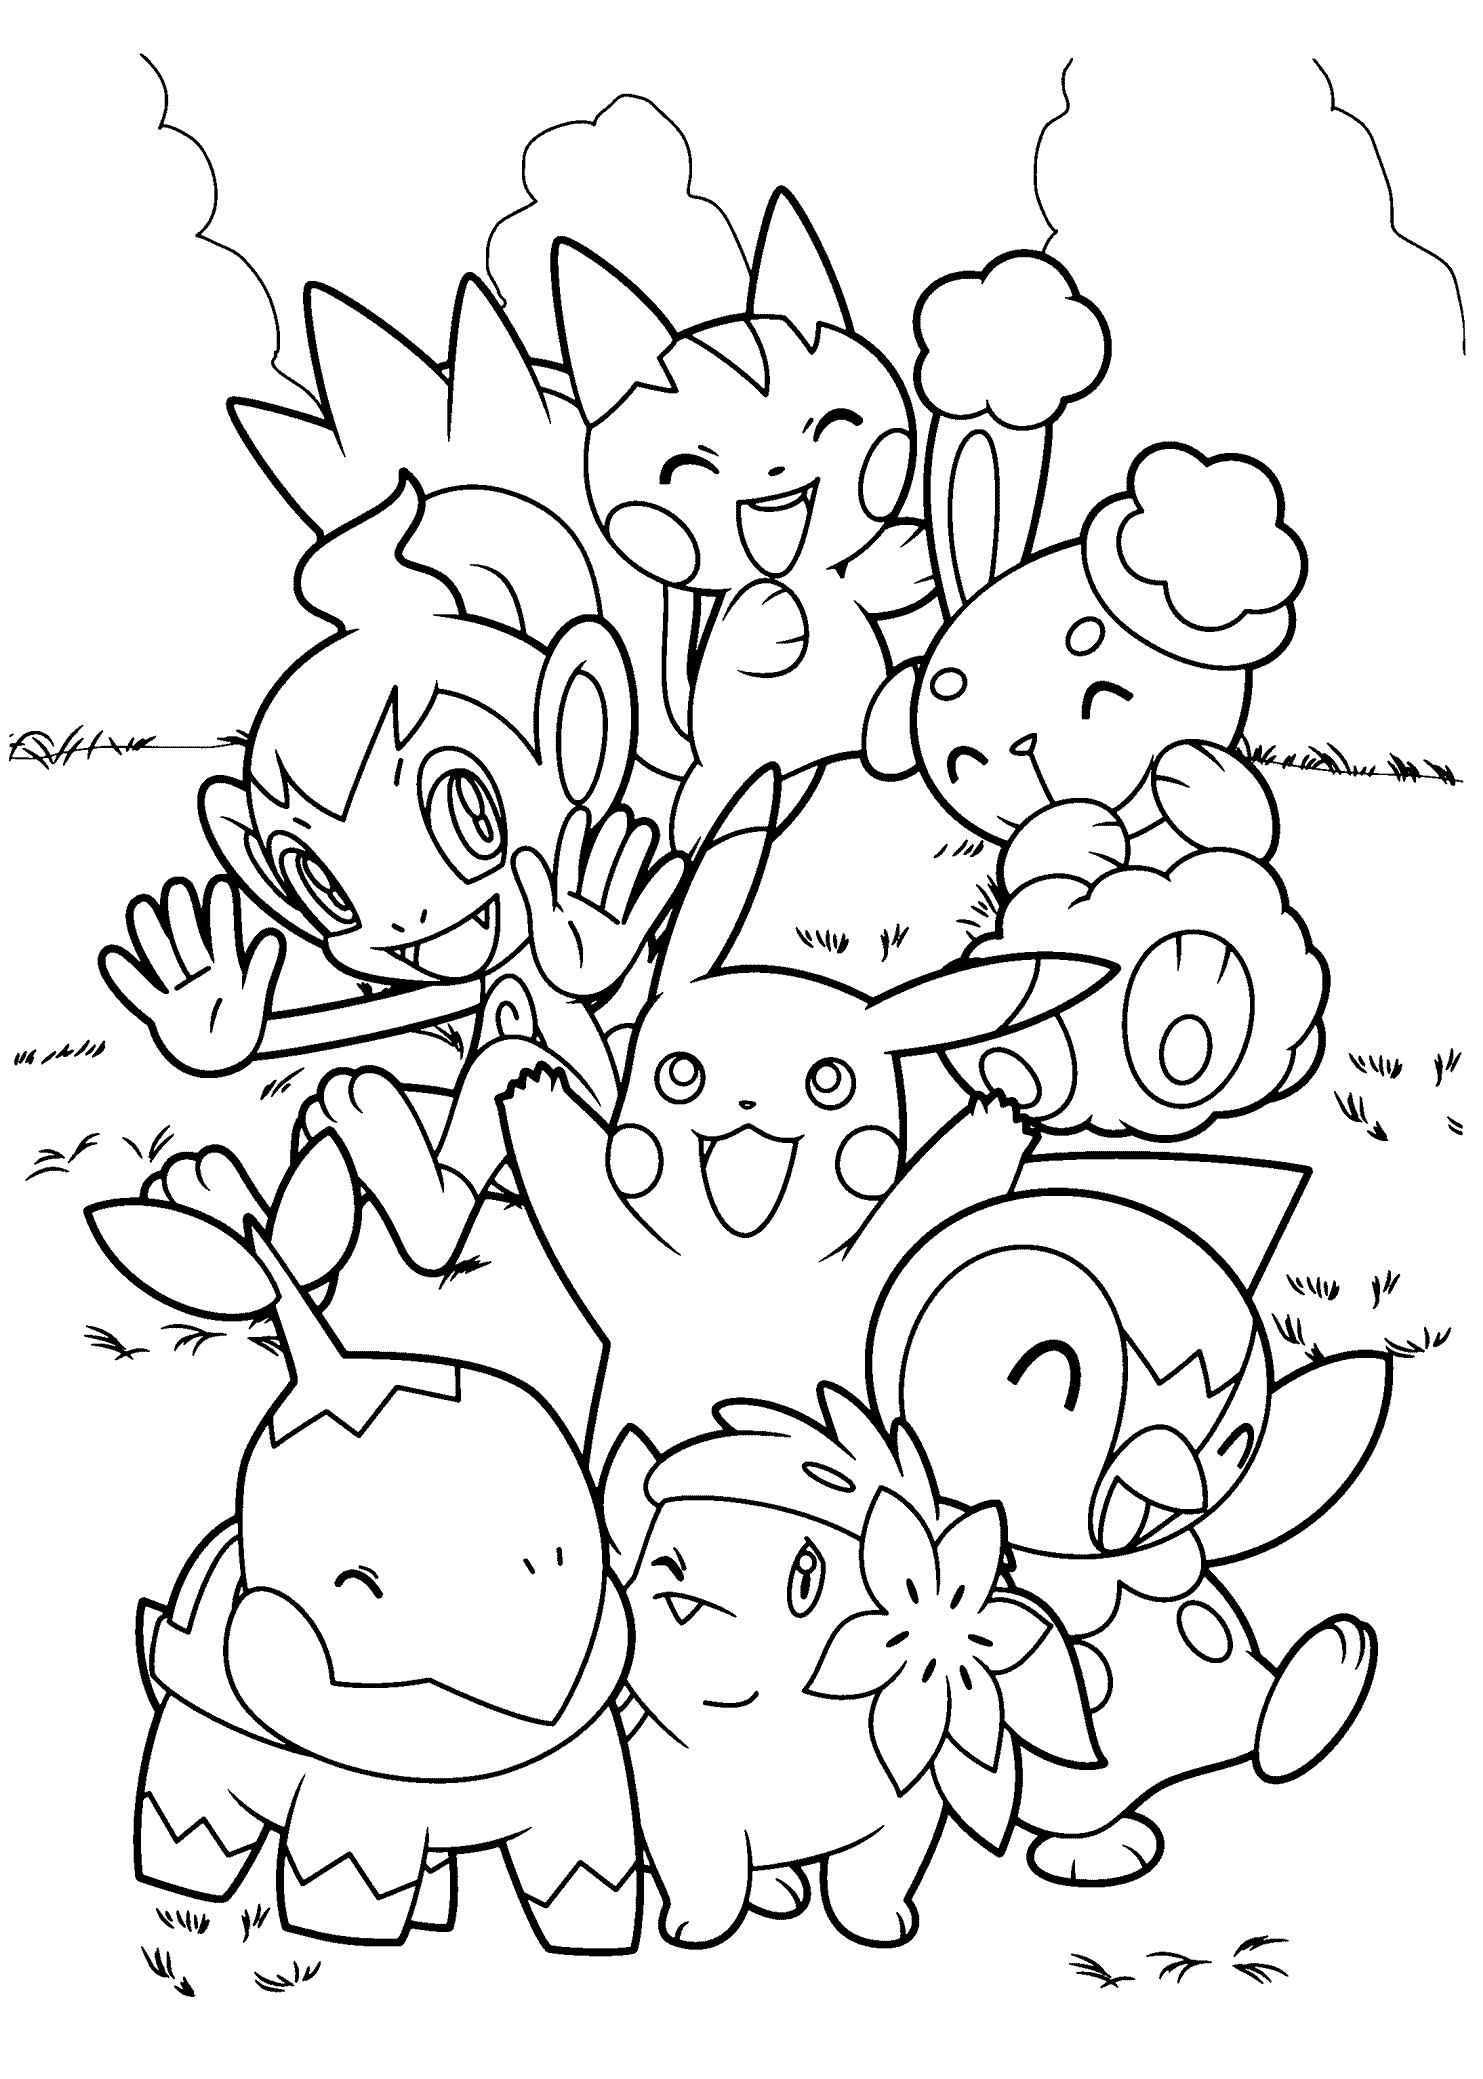 Printed Coloring Sheets Beautiful top 75 Free Printable Pokemon Coloring Pages Line